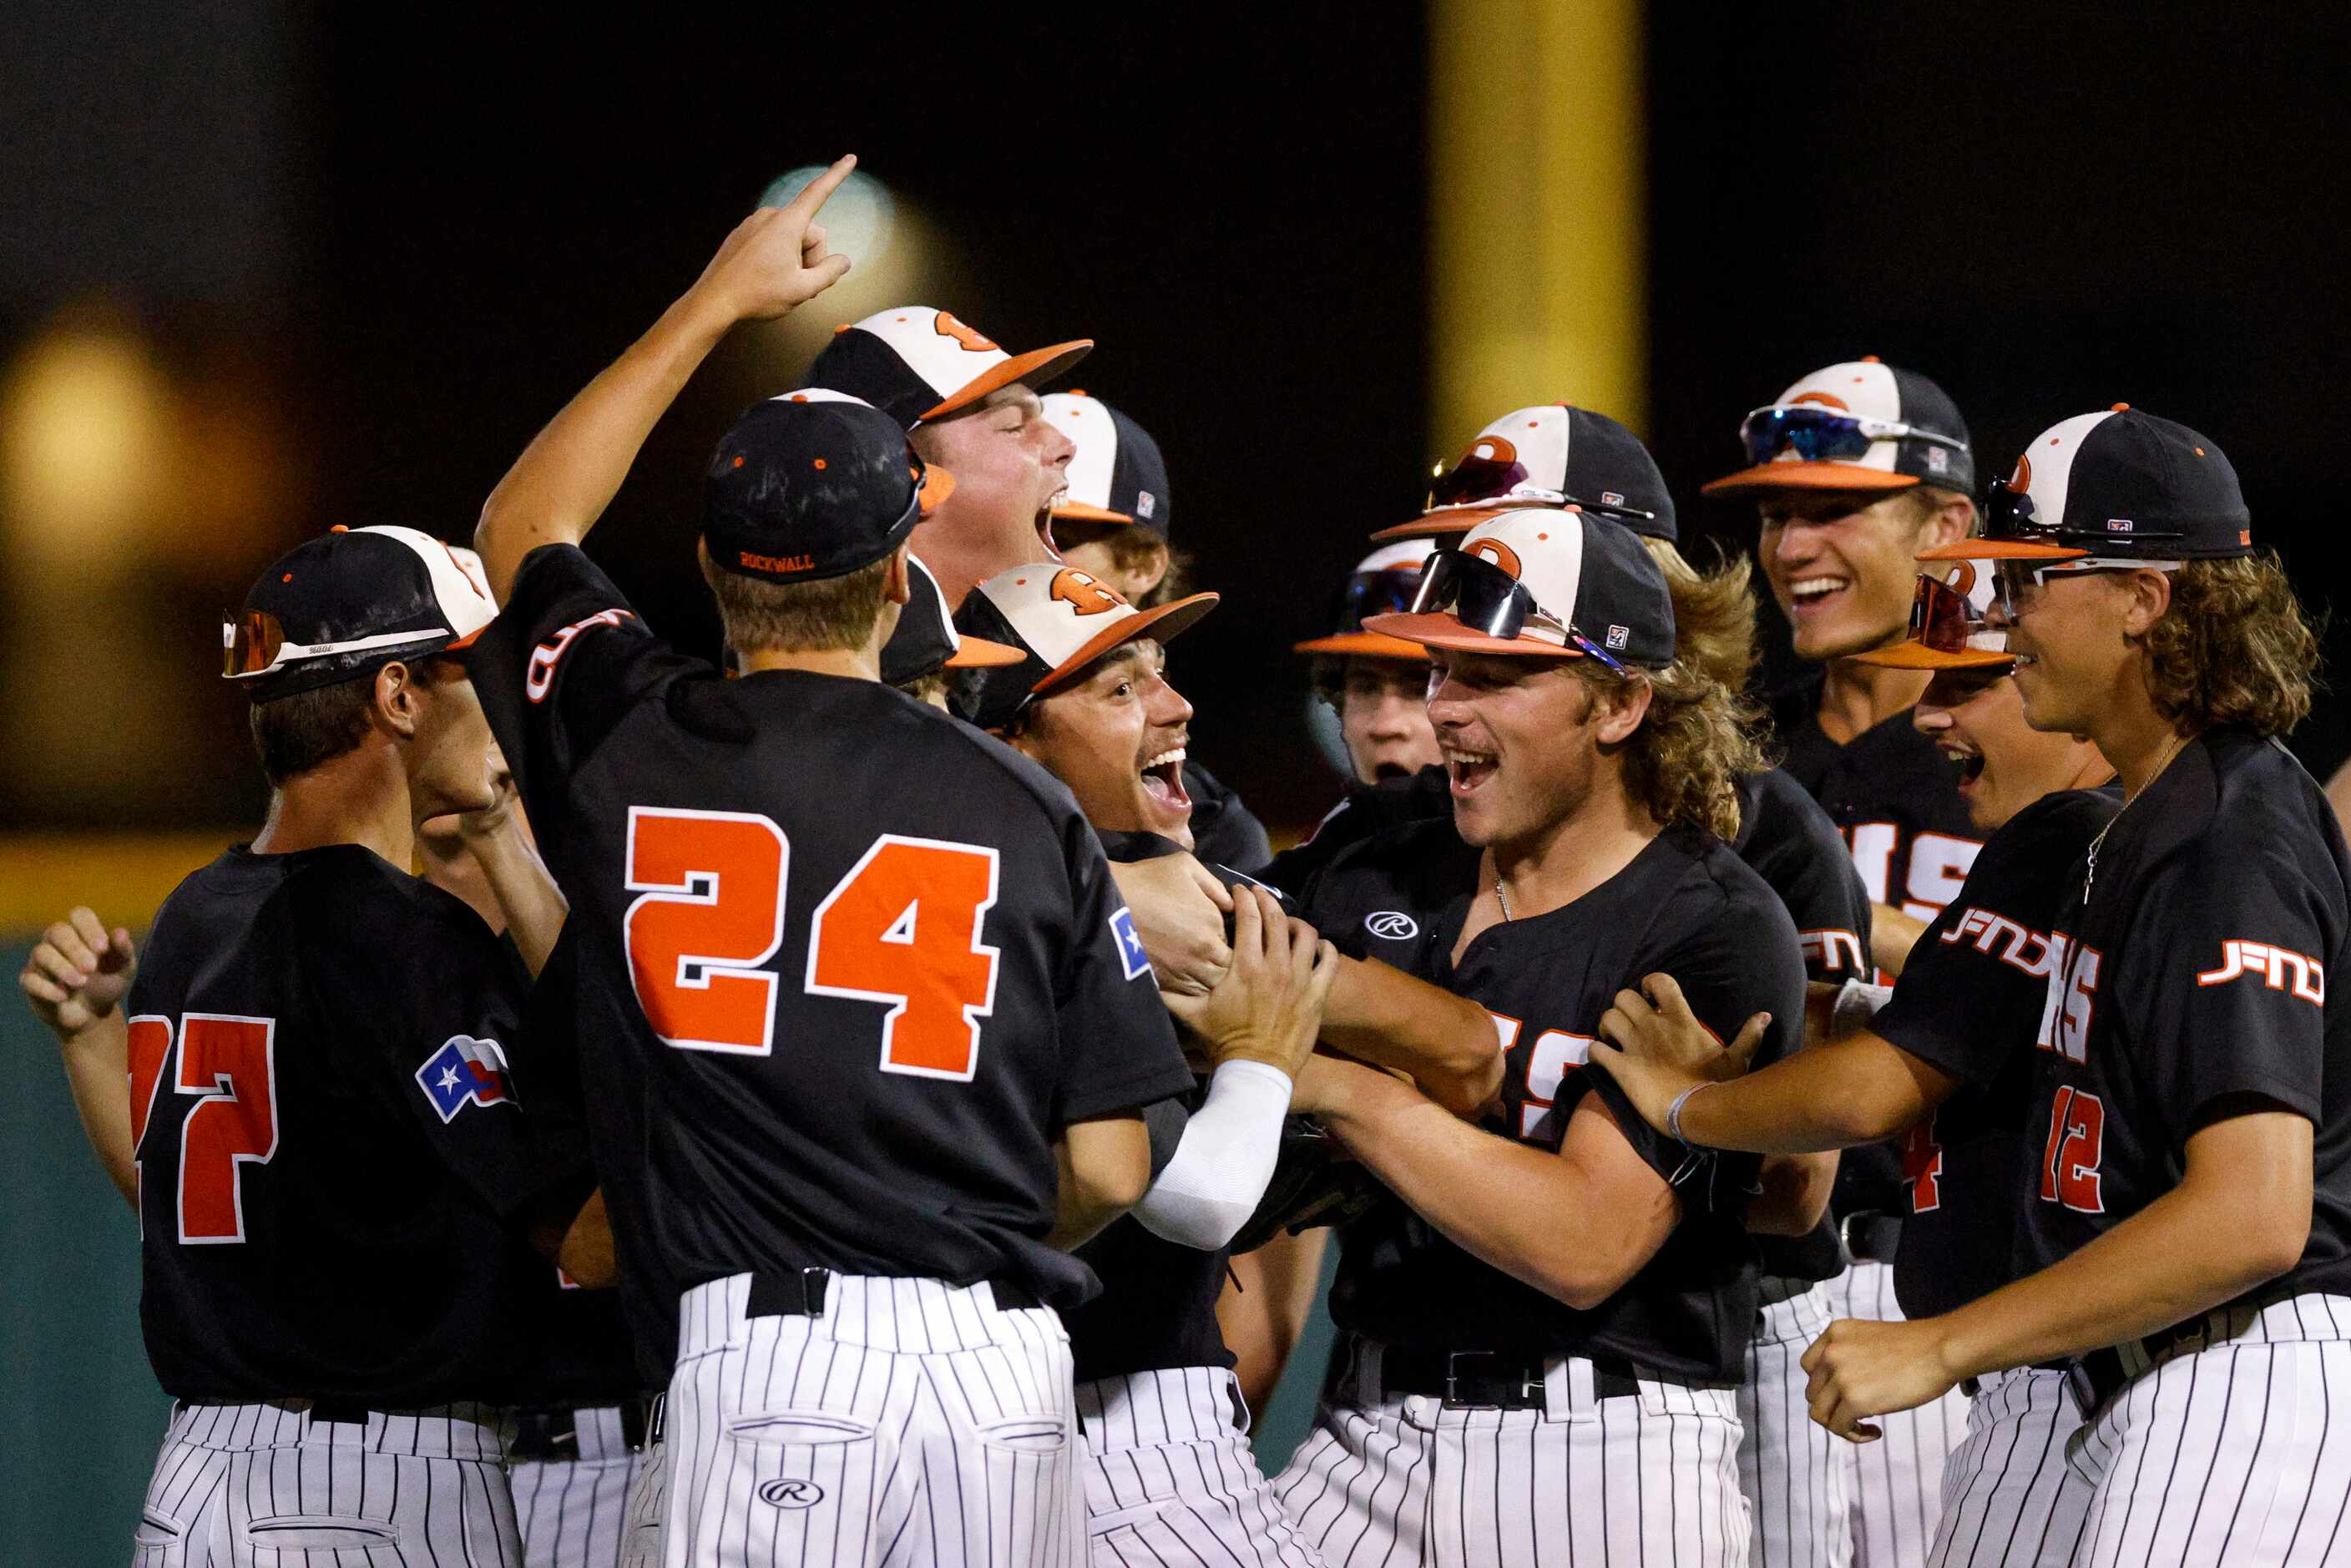 Rockwall catcher Jake Overstreet (11) celebrates with pitcher Mac Rose (6) after winning a...